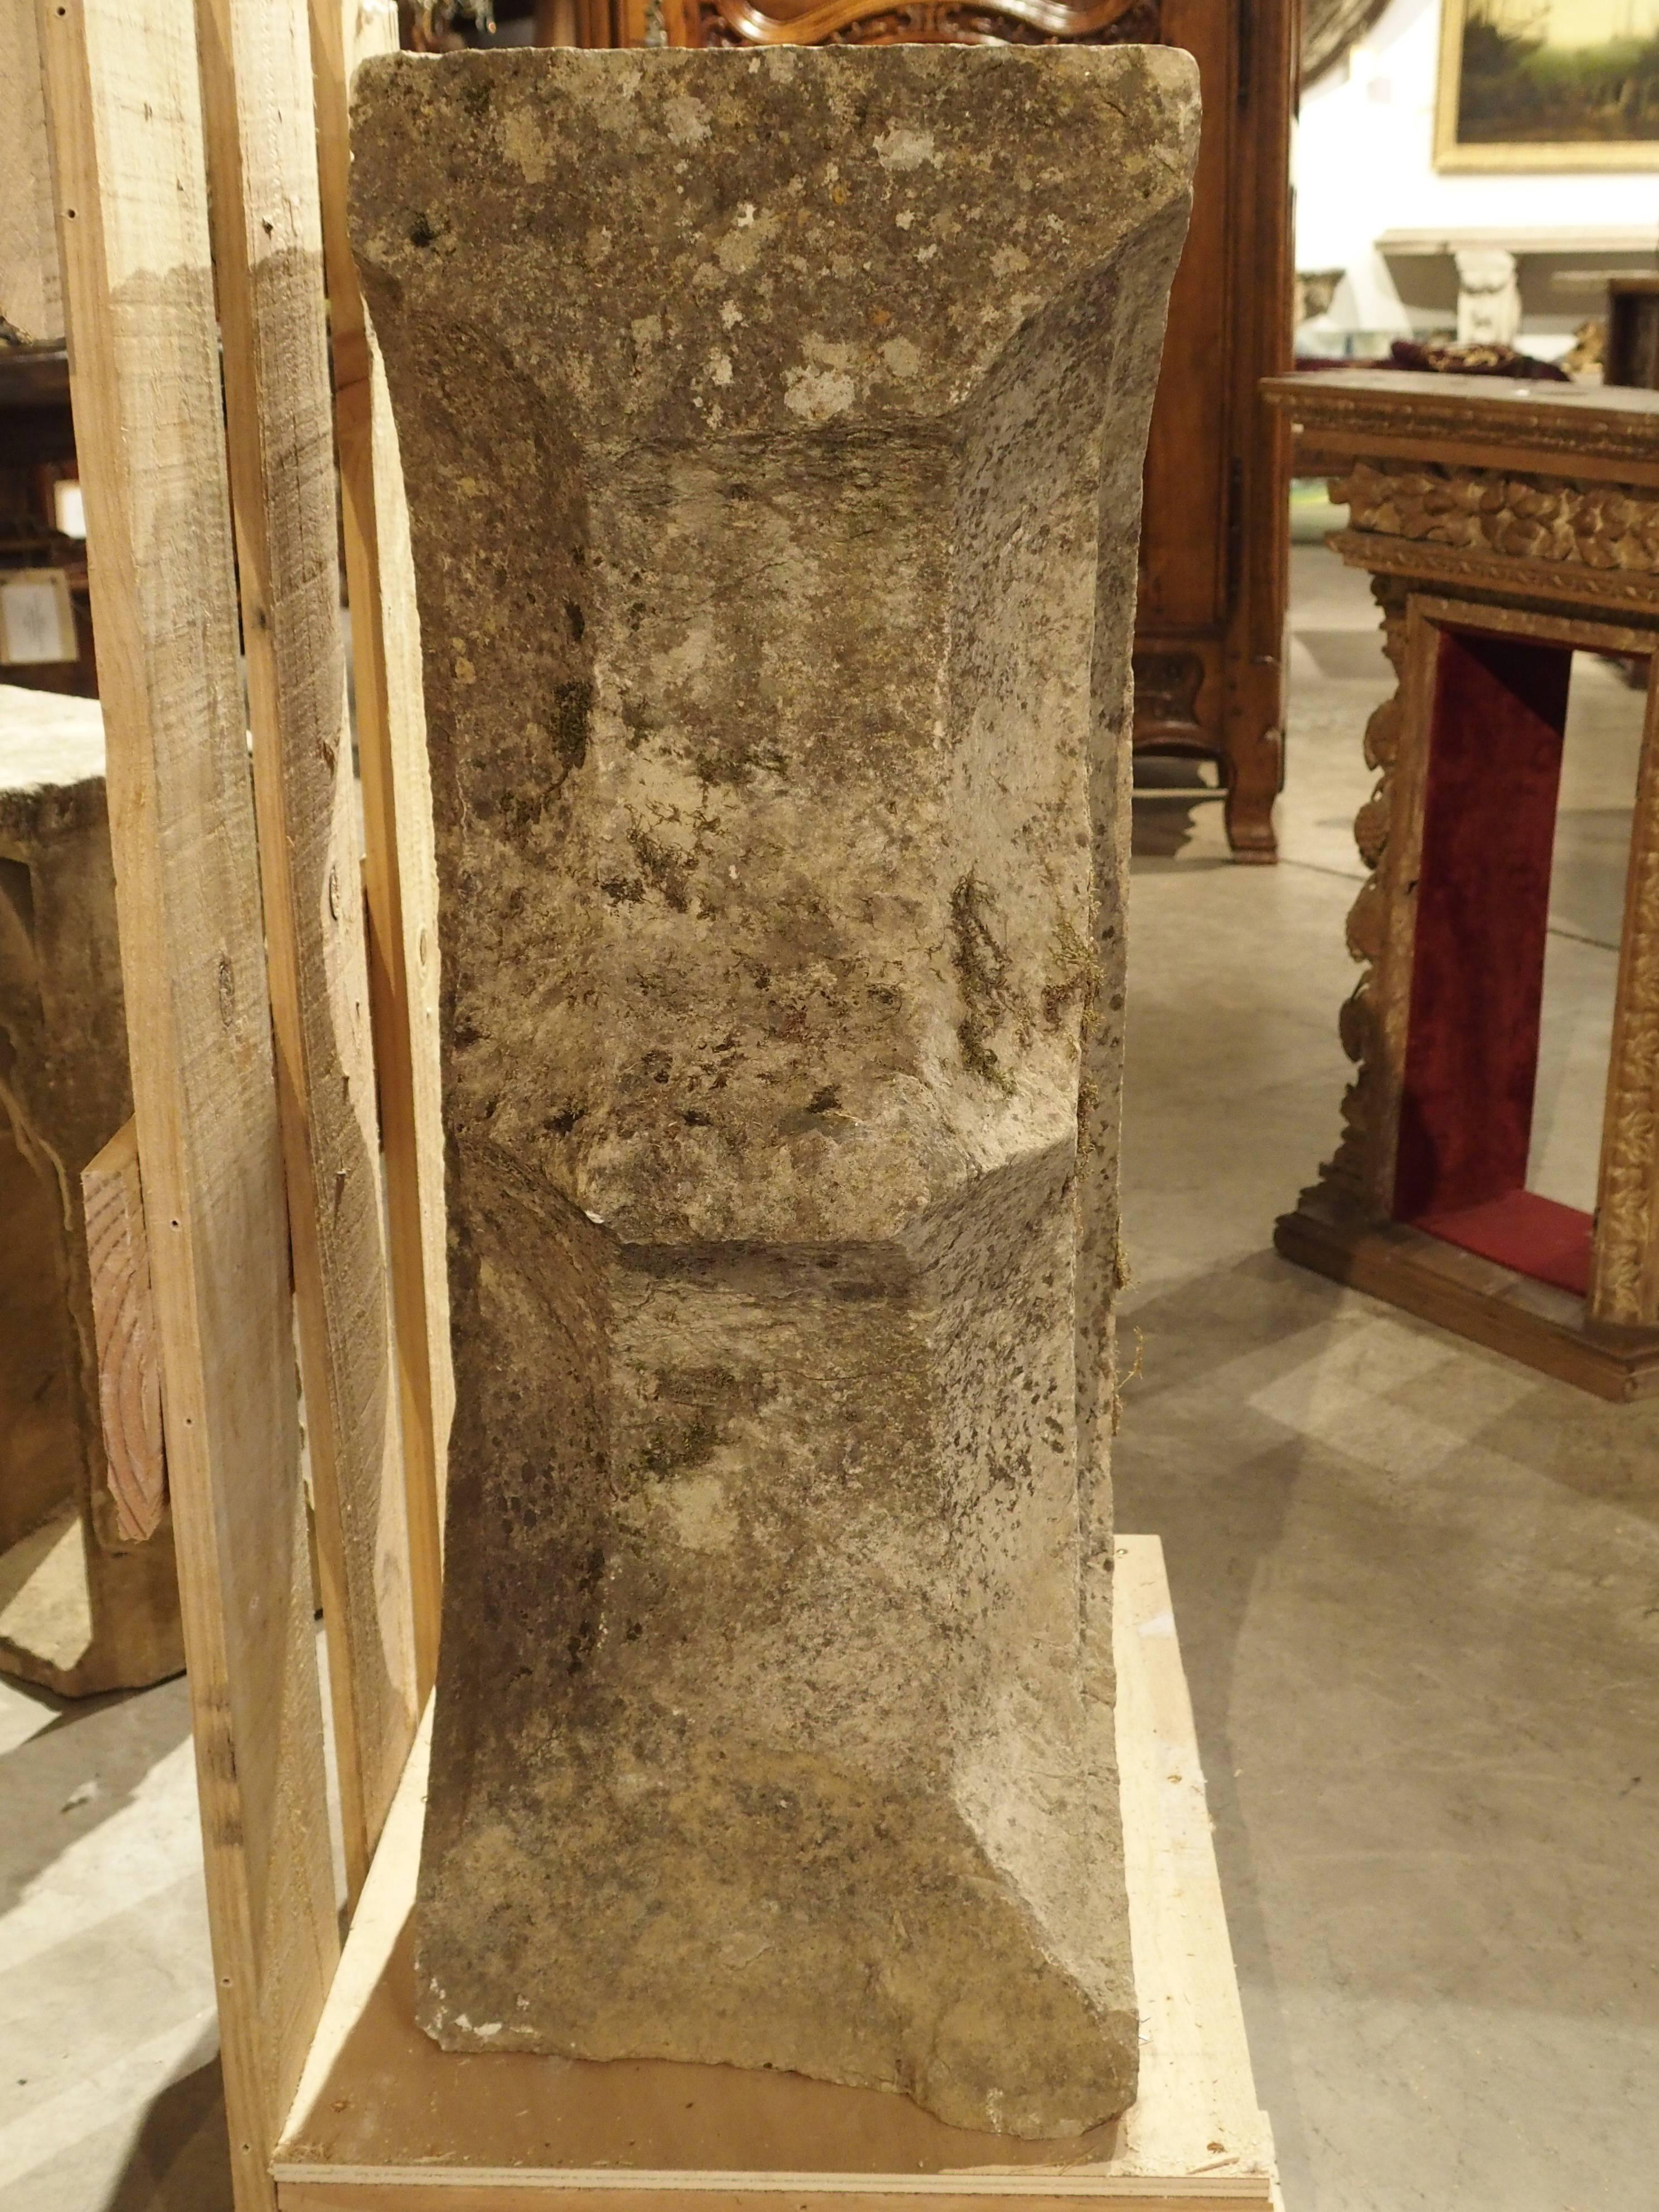 Gothic Period Architectural Stone Fragment from France, 15th Century 3